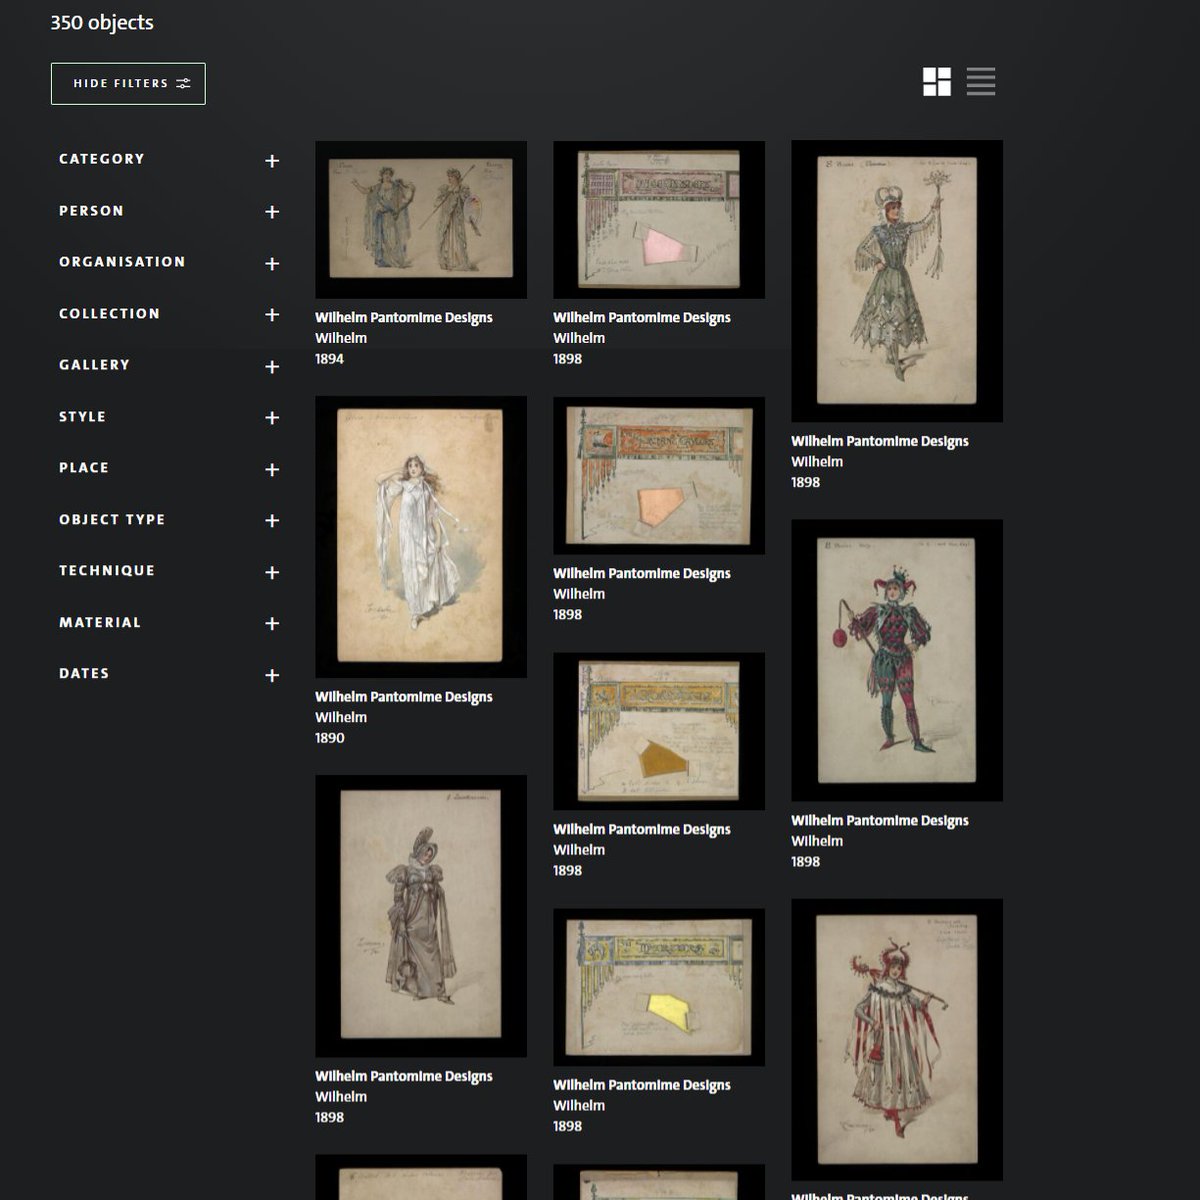 Via the new  @V_and_A Explore the Collections, you can click on any highlighted text to search for that term  https://collections.vam.ac.uk/item/O155058/wilhelm-costume-design-costume-design-wilhelm/